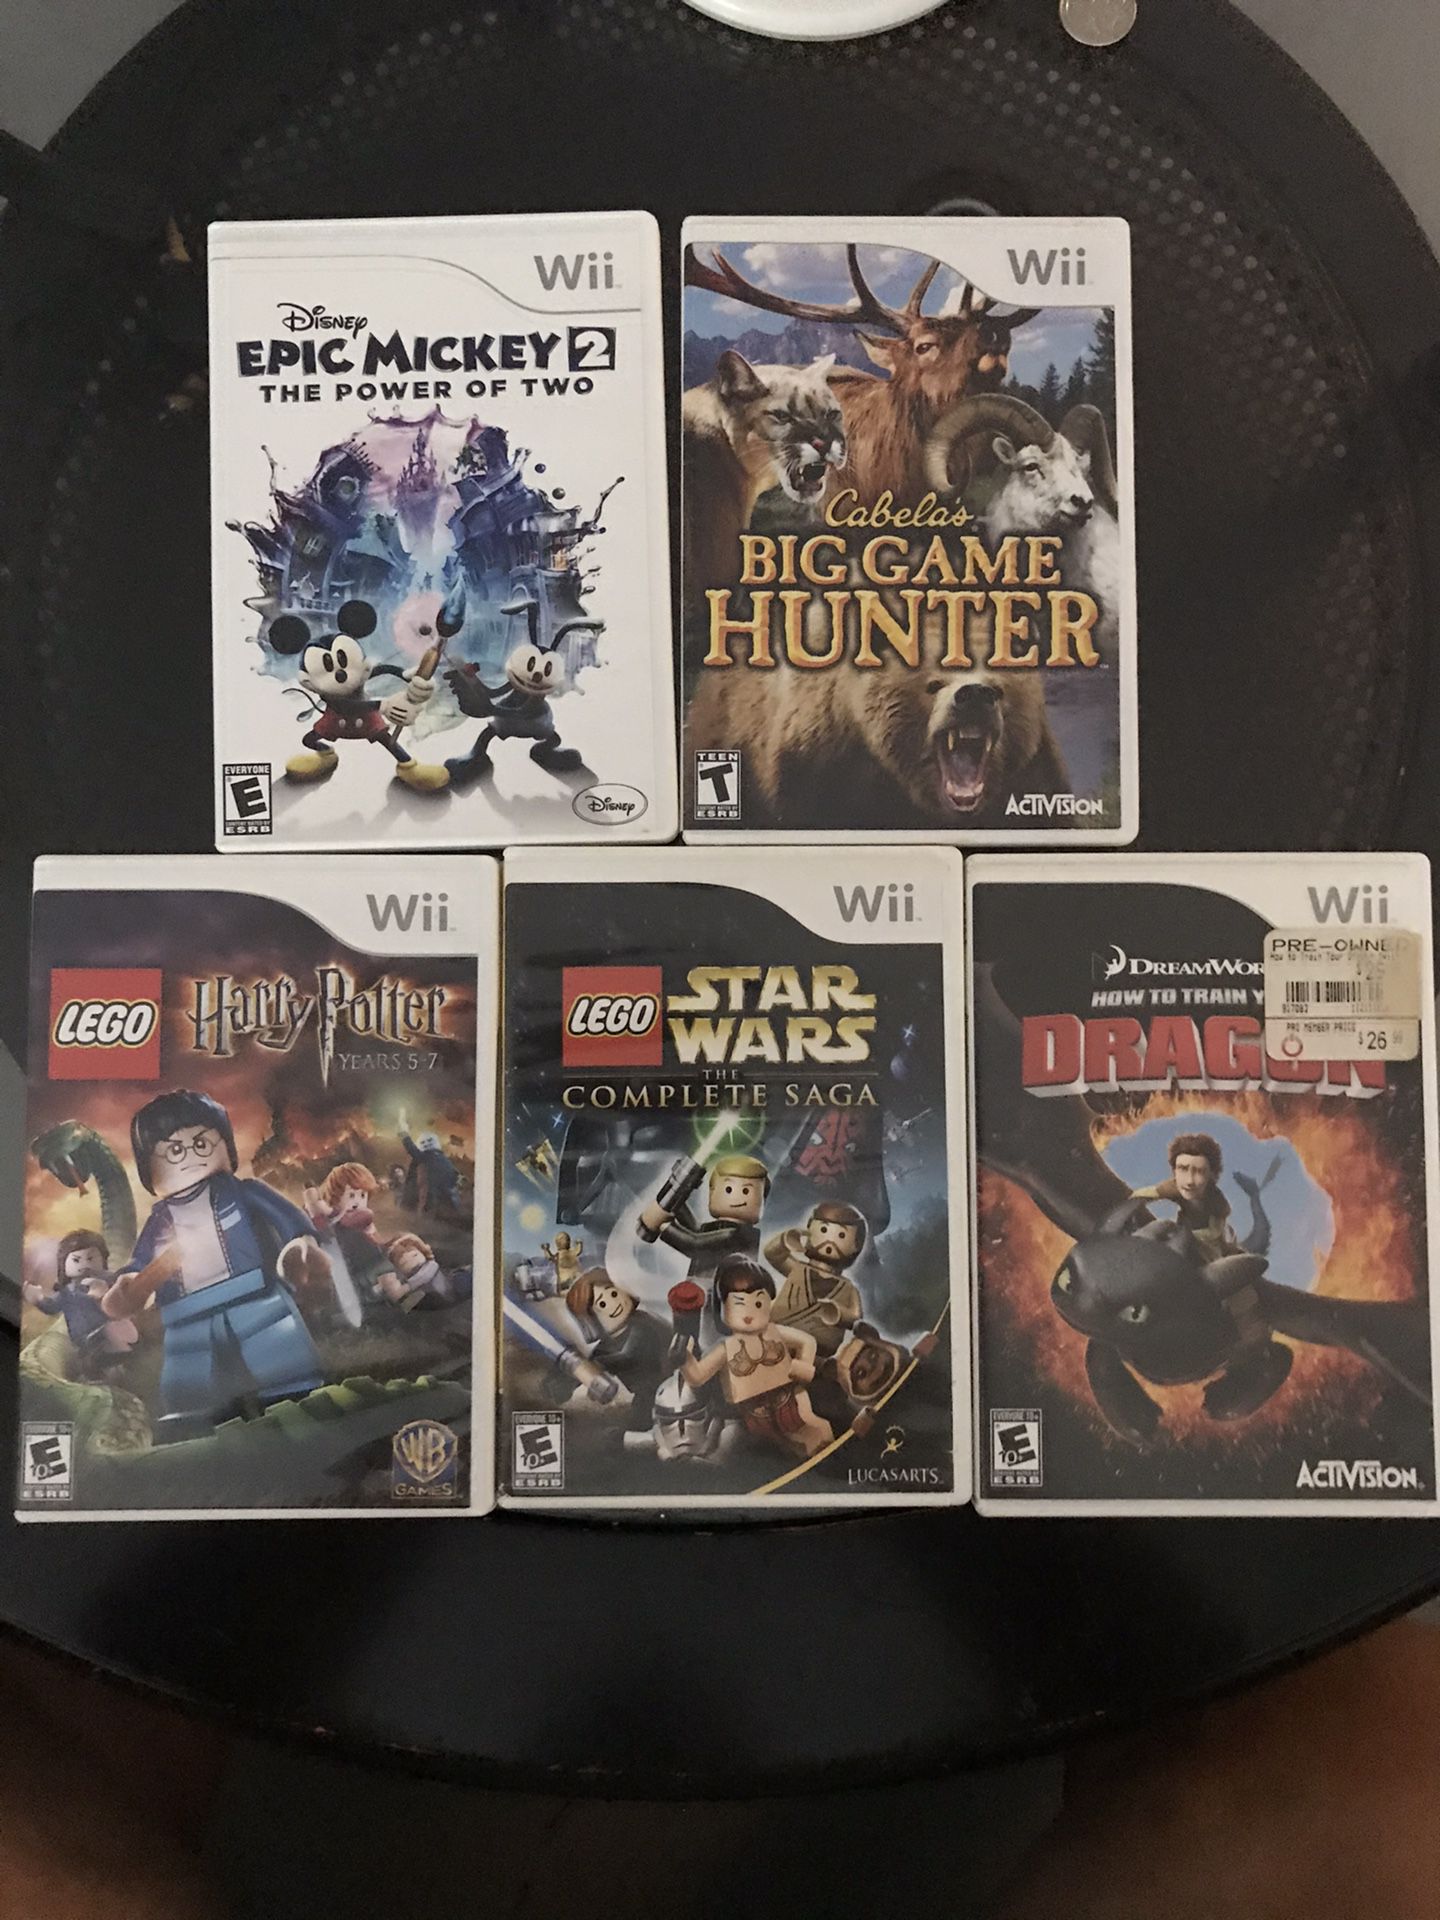 Wii games LEGO games